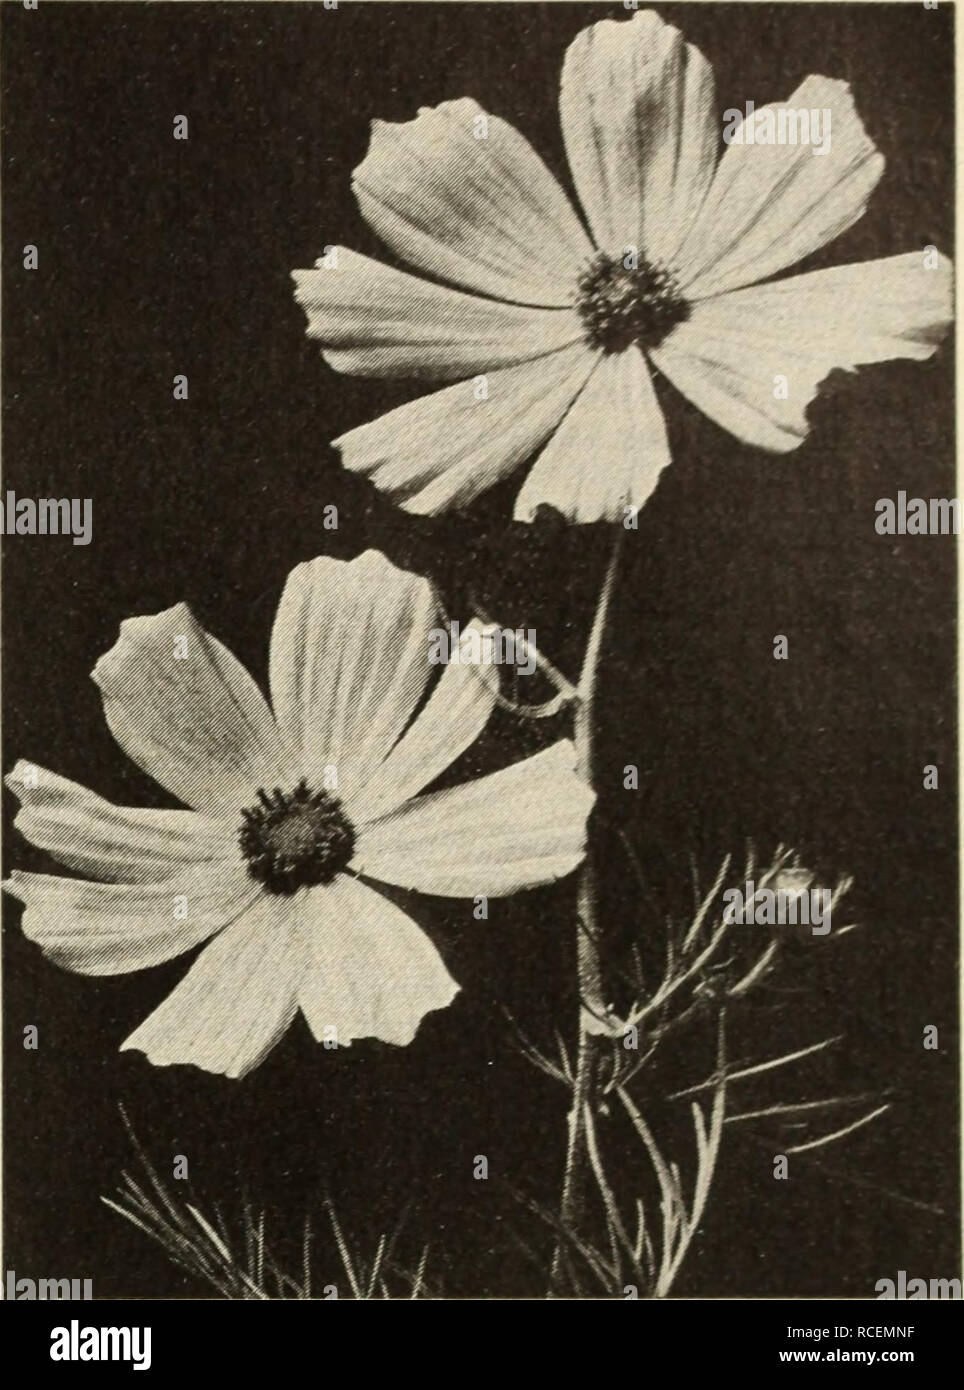 . Dingee guide to rose culture : for more than 60 years an authority. Dingee Brilliant Nasturtiums Tall or Climbing Nasturtiums Dlngree's Variegrated Leaved. Flowers of numerous bright colors, produces a charming- contrast with the variegated leaves. Pkt., 10c.; oz., 25c. Butterfly. Of a clear lemon-yellow, marked on lower petals with a blotch of rich terra-cotta red, Oz., 20c. Gold Garnet. Rich orange-yellow, with base of peals blotched garnet. Oz., 20c. Kins of the Blacks. Brownish red. Oz., 15c.; J4 lb., 50c. Spitfire. Intense glowing scarlet. Oz., 15c. Midnight. Dark green foliage. Flowers Stock Photo